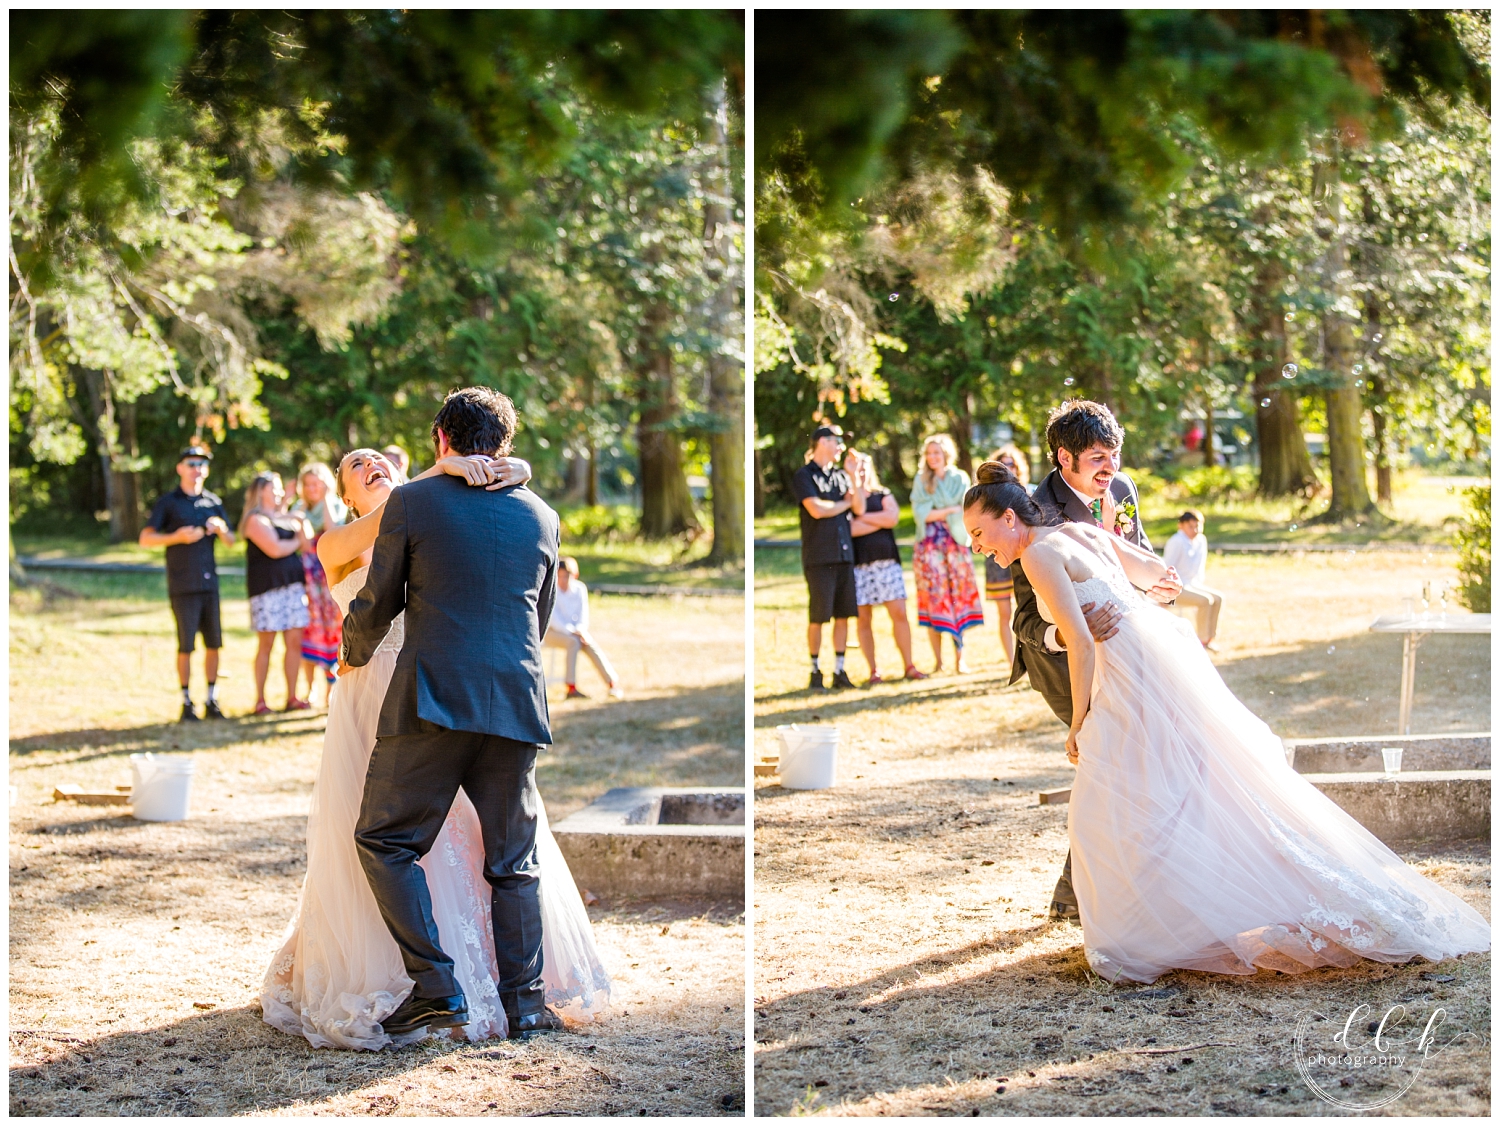 bride and groom can't stop laughing during first dance at wedding in Washington Park, Anacortes